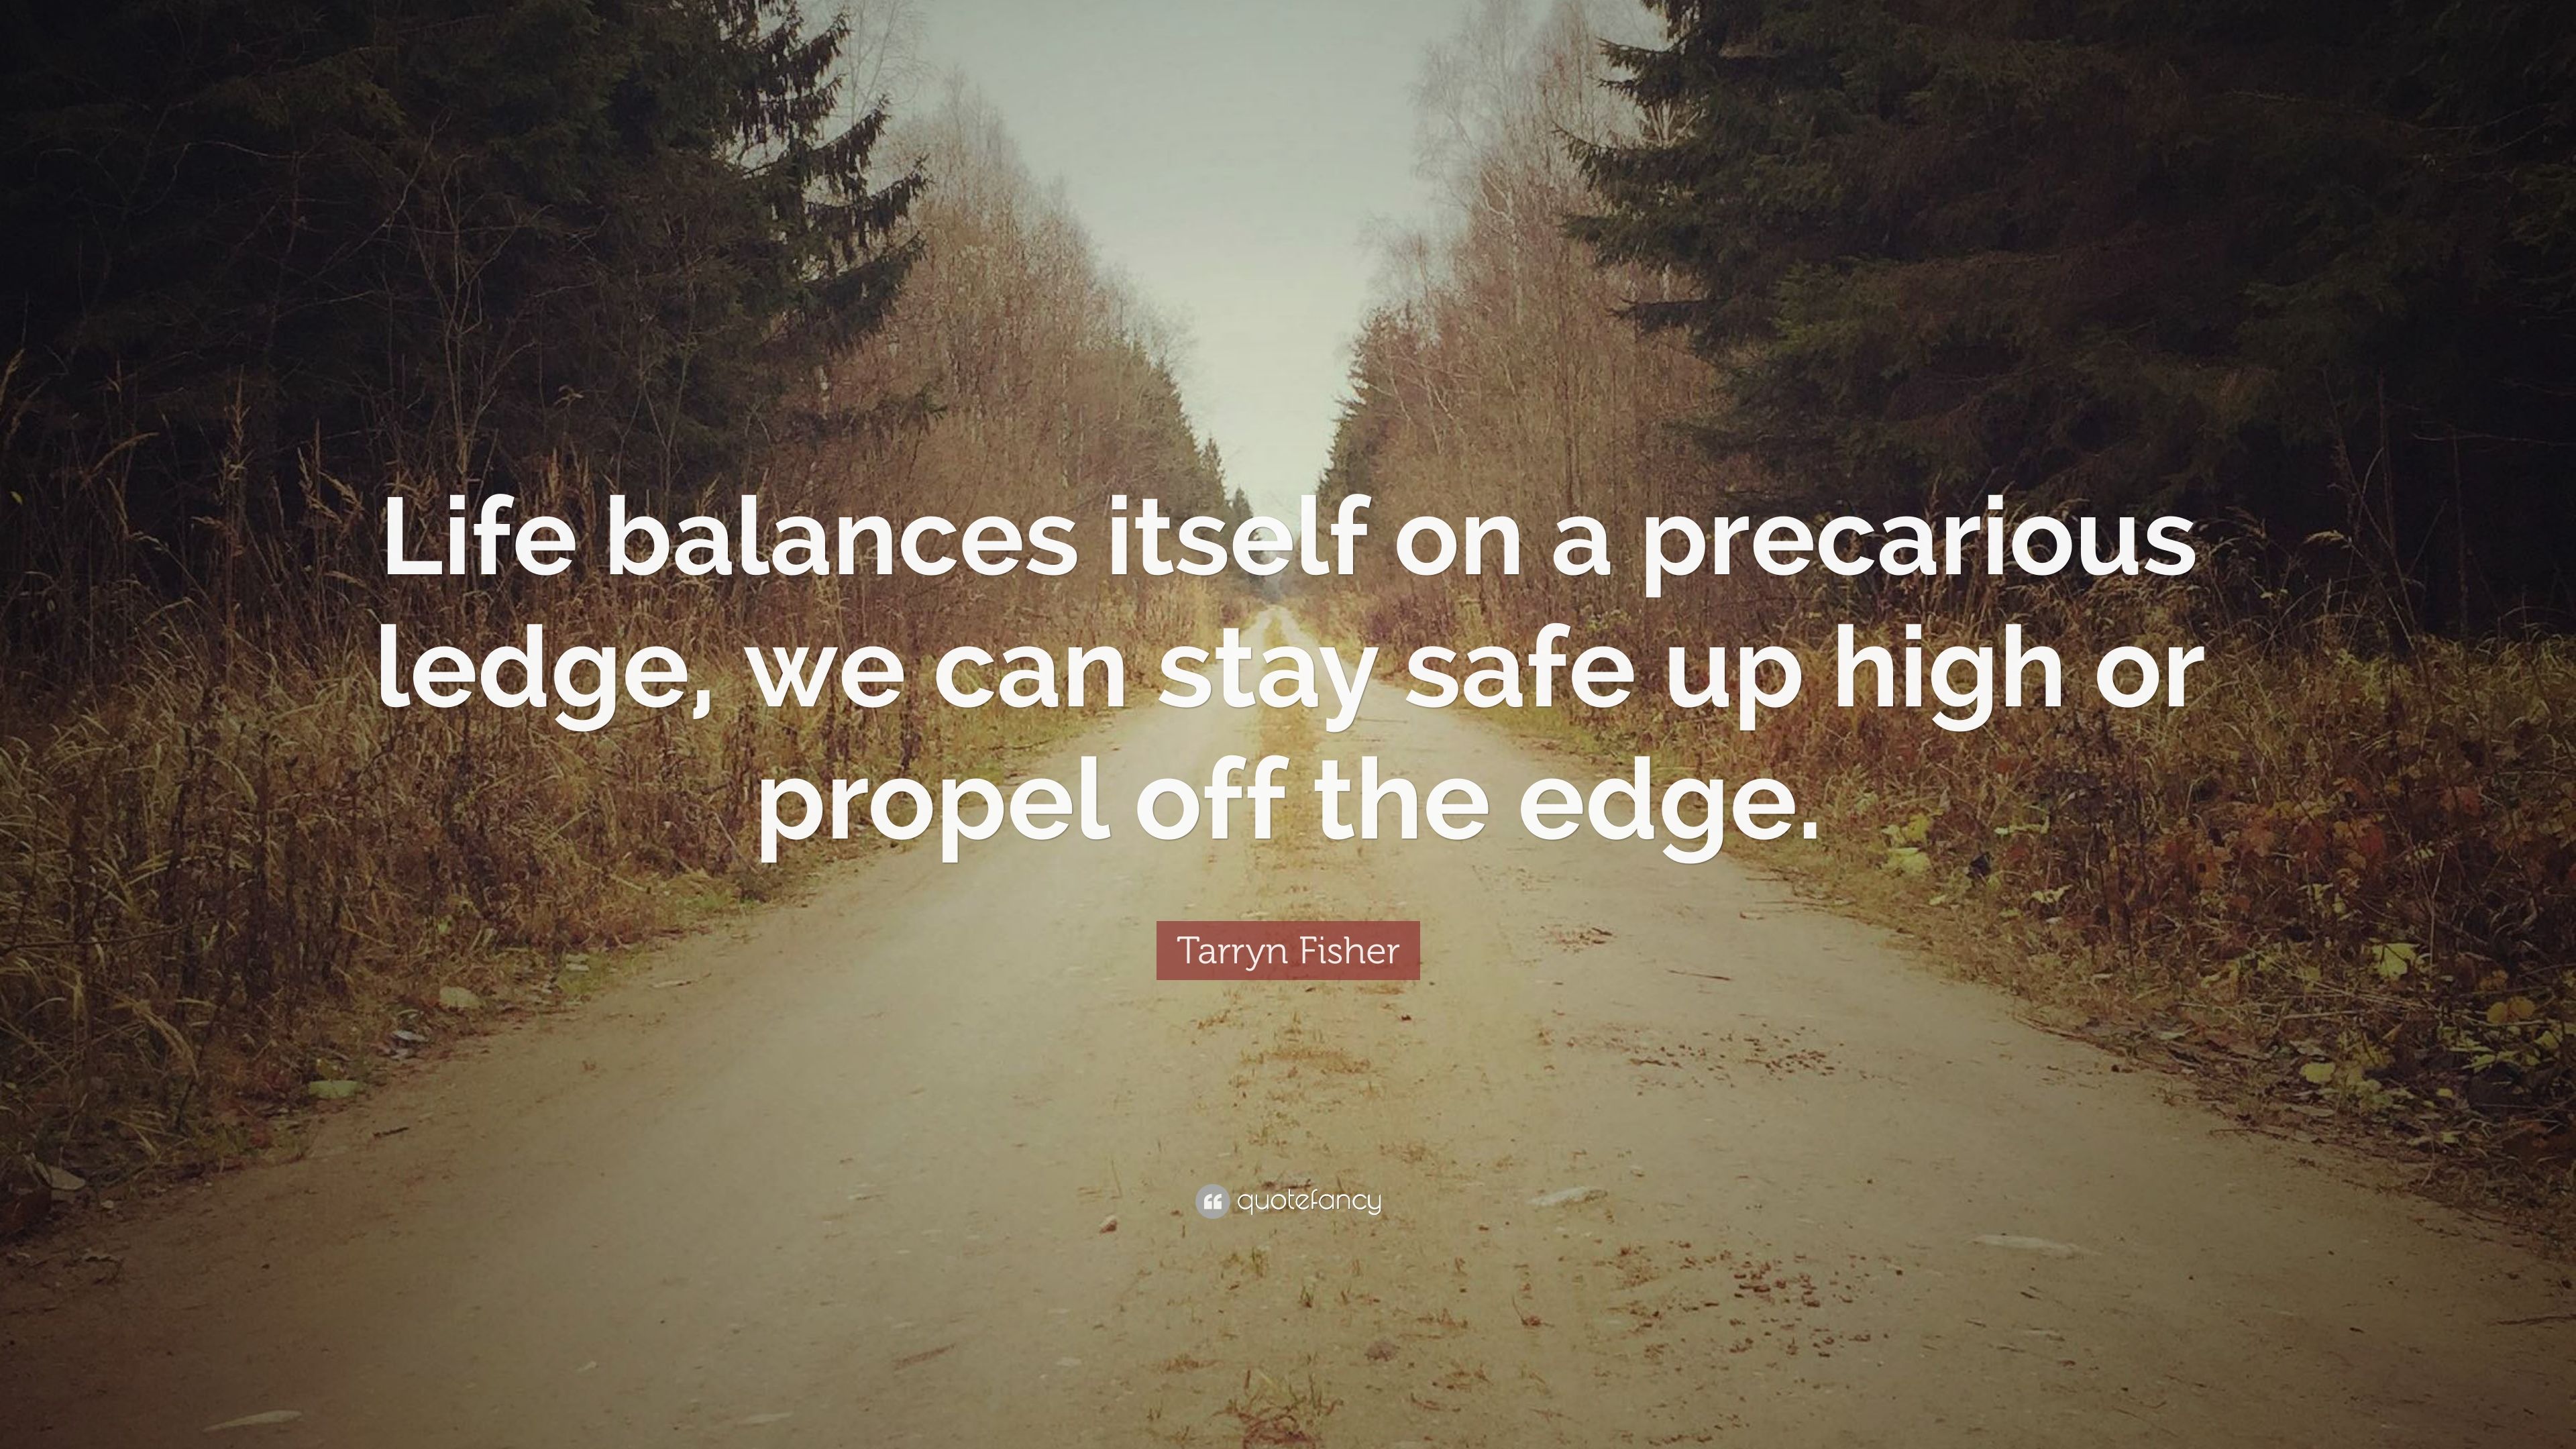 Tarryn Fisher Quote: “Life balances itself on a precarious ledge